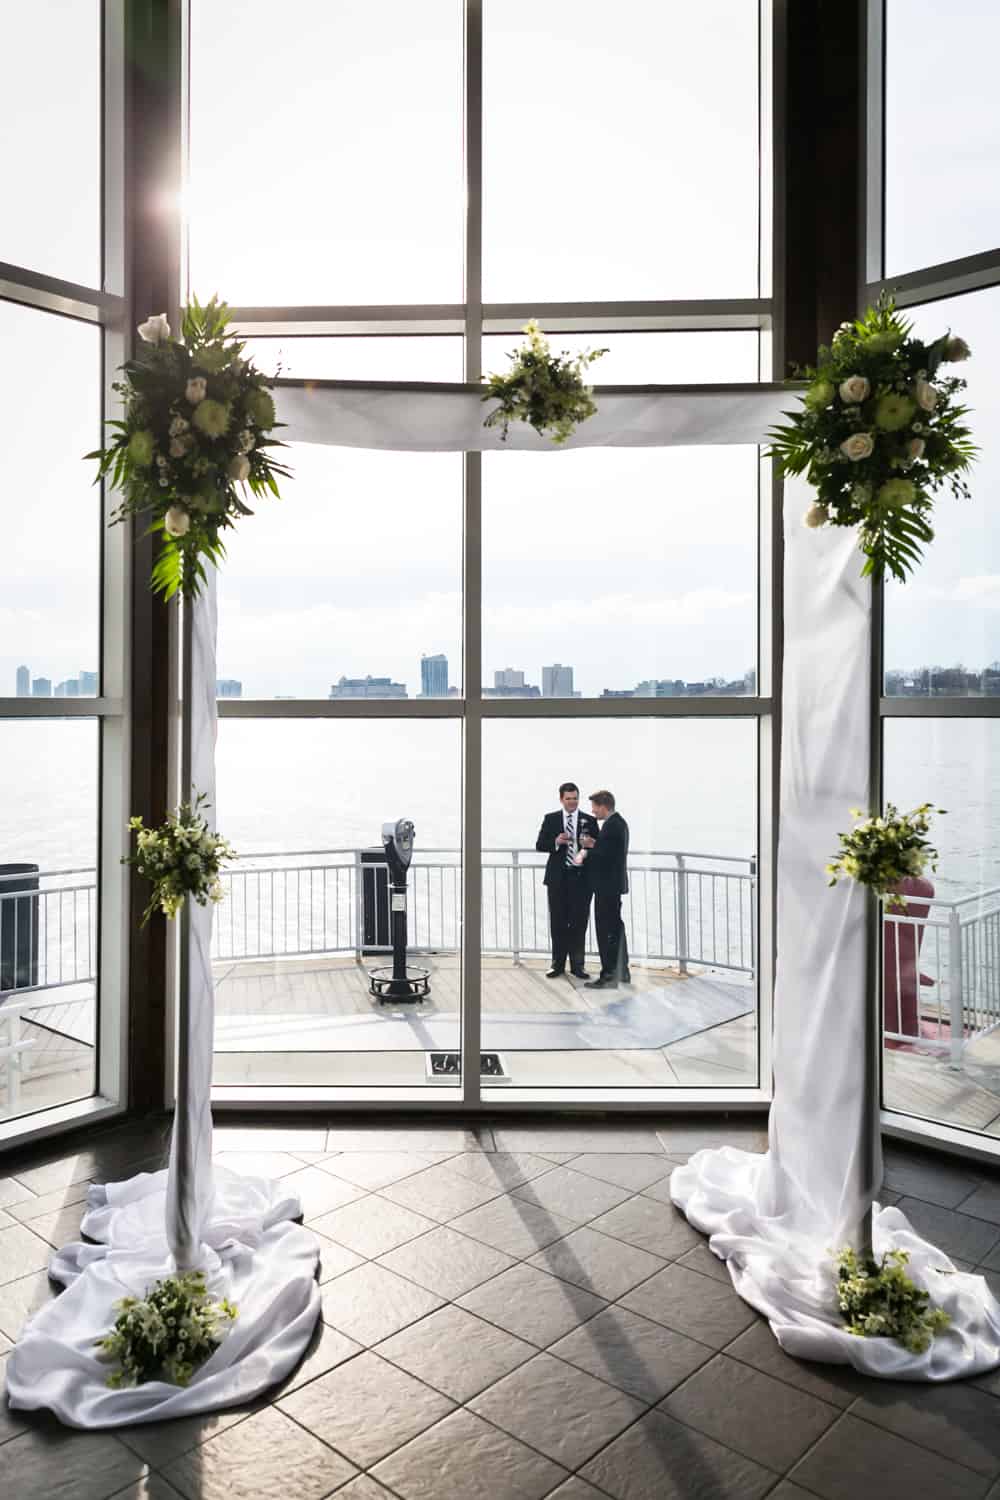 View of Hudson River and two guests outside through altar